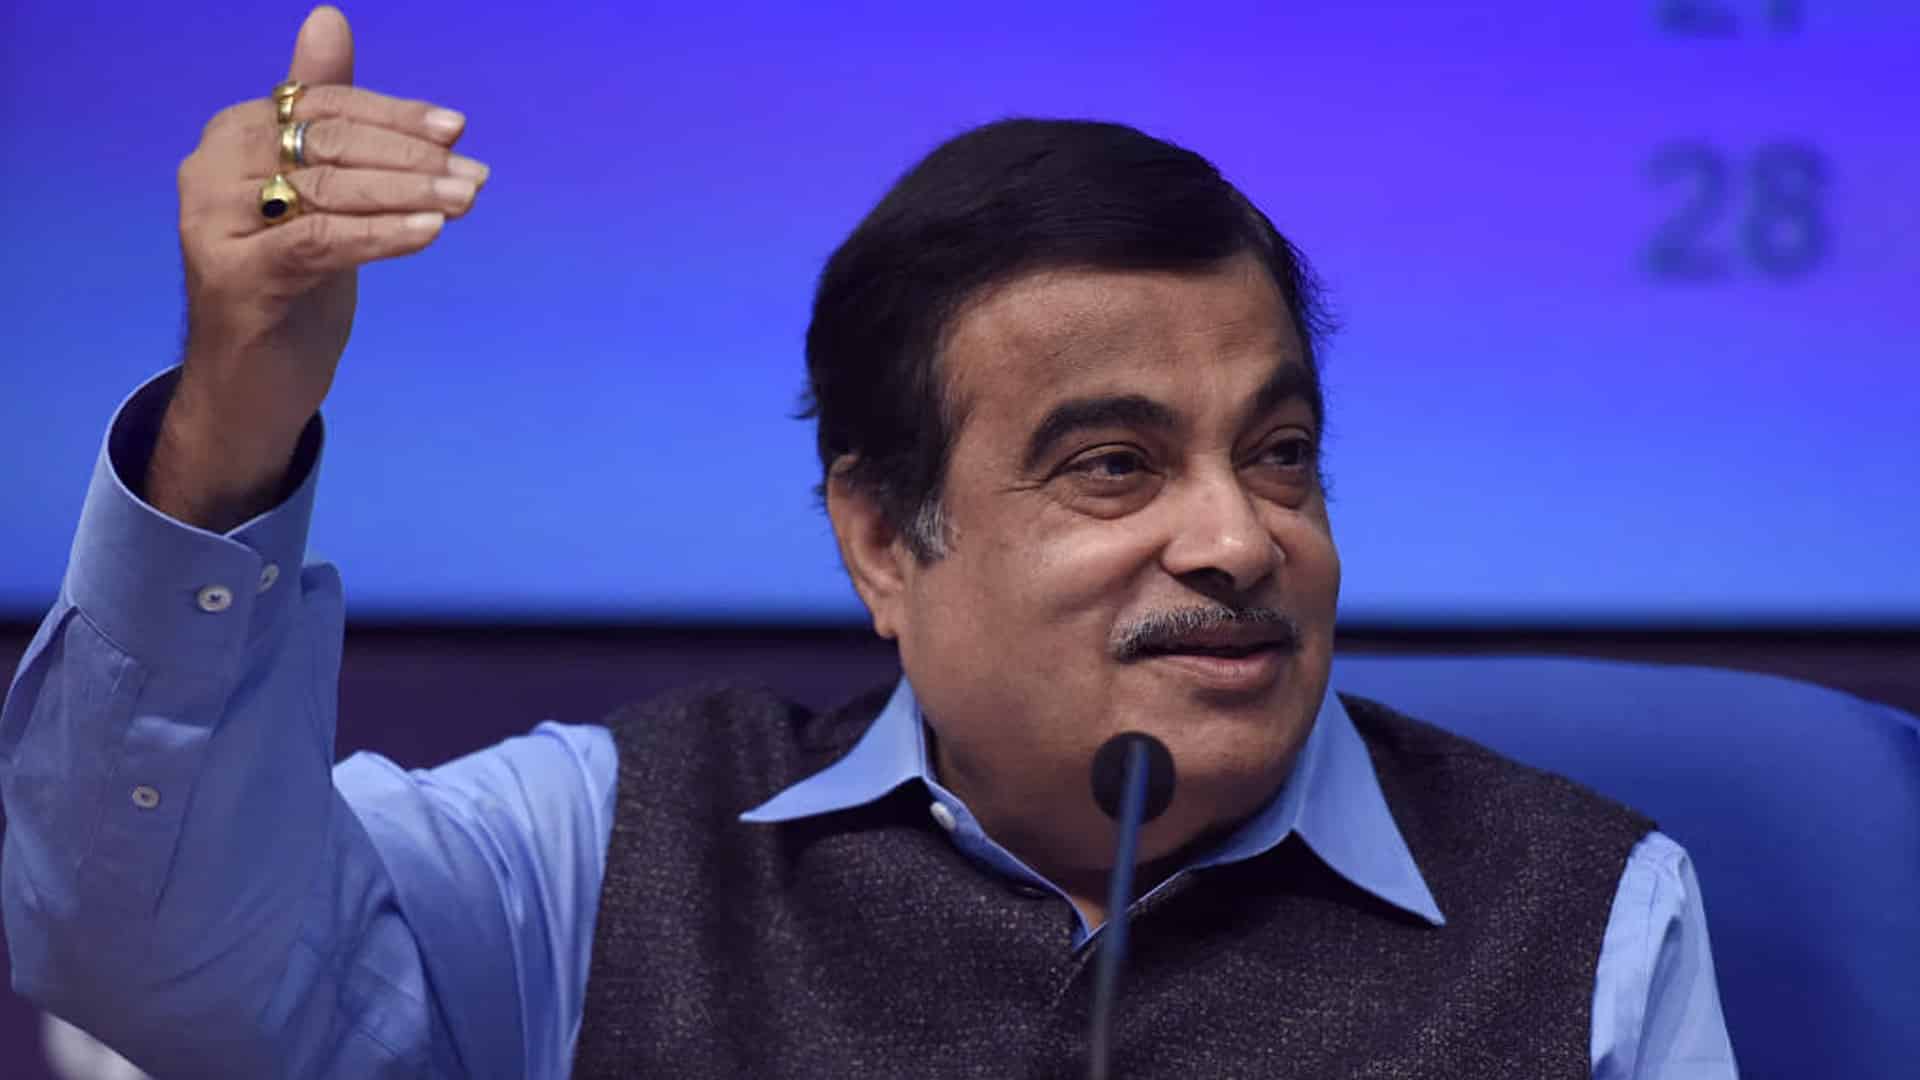 9 lakh govt vehicles, buses older than 15 yrs to go off the road from Apr 1, says Gadkari